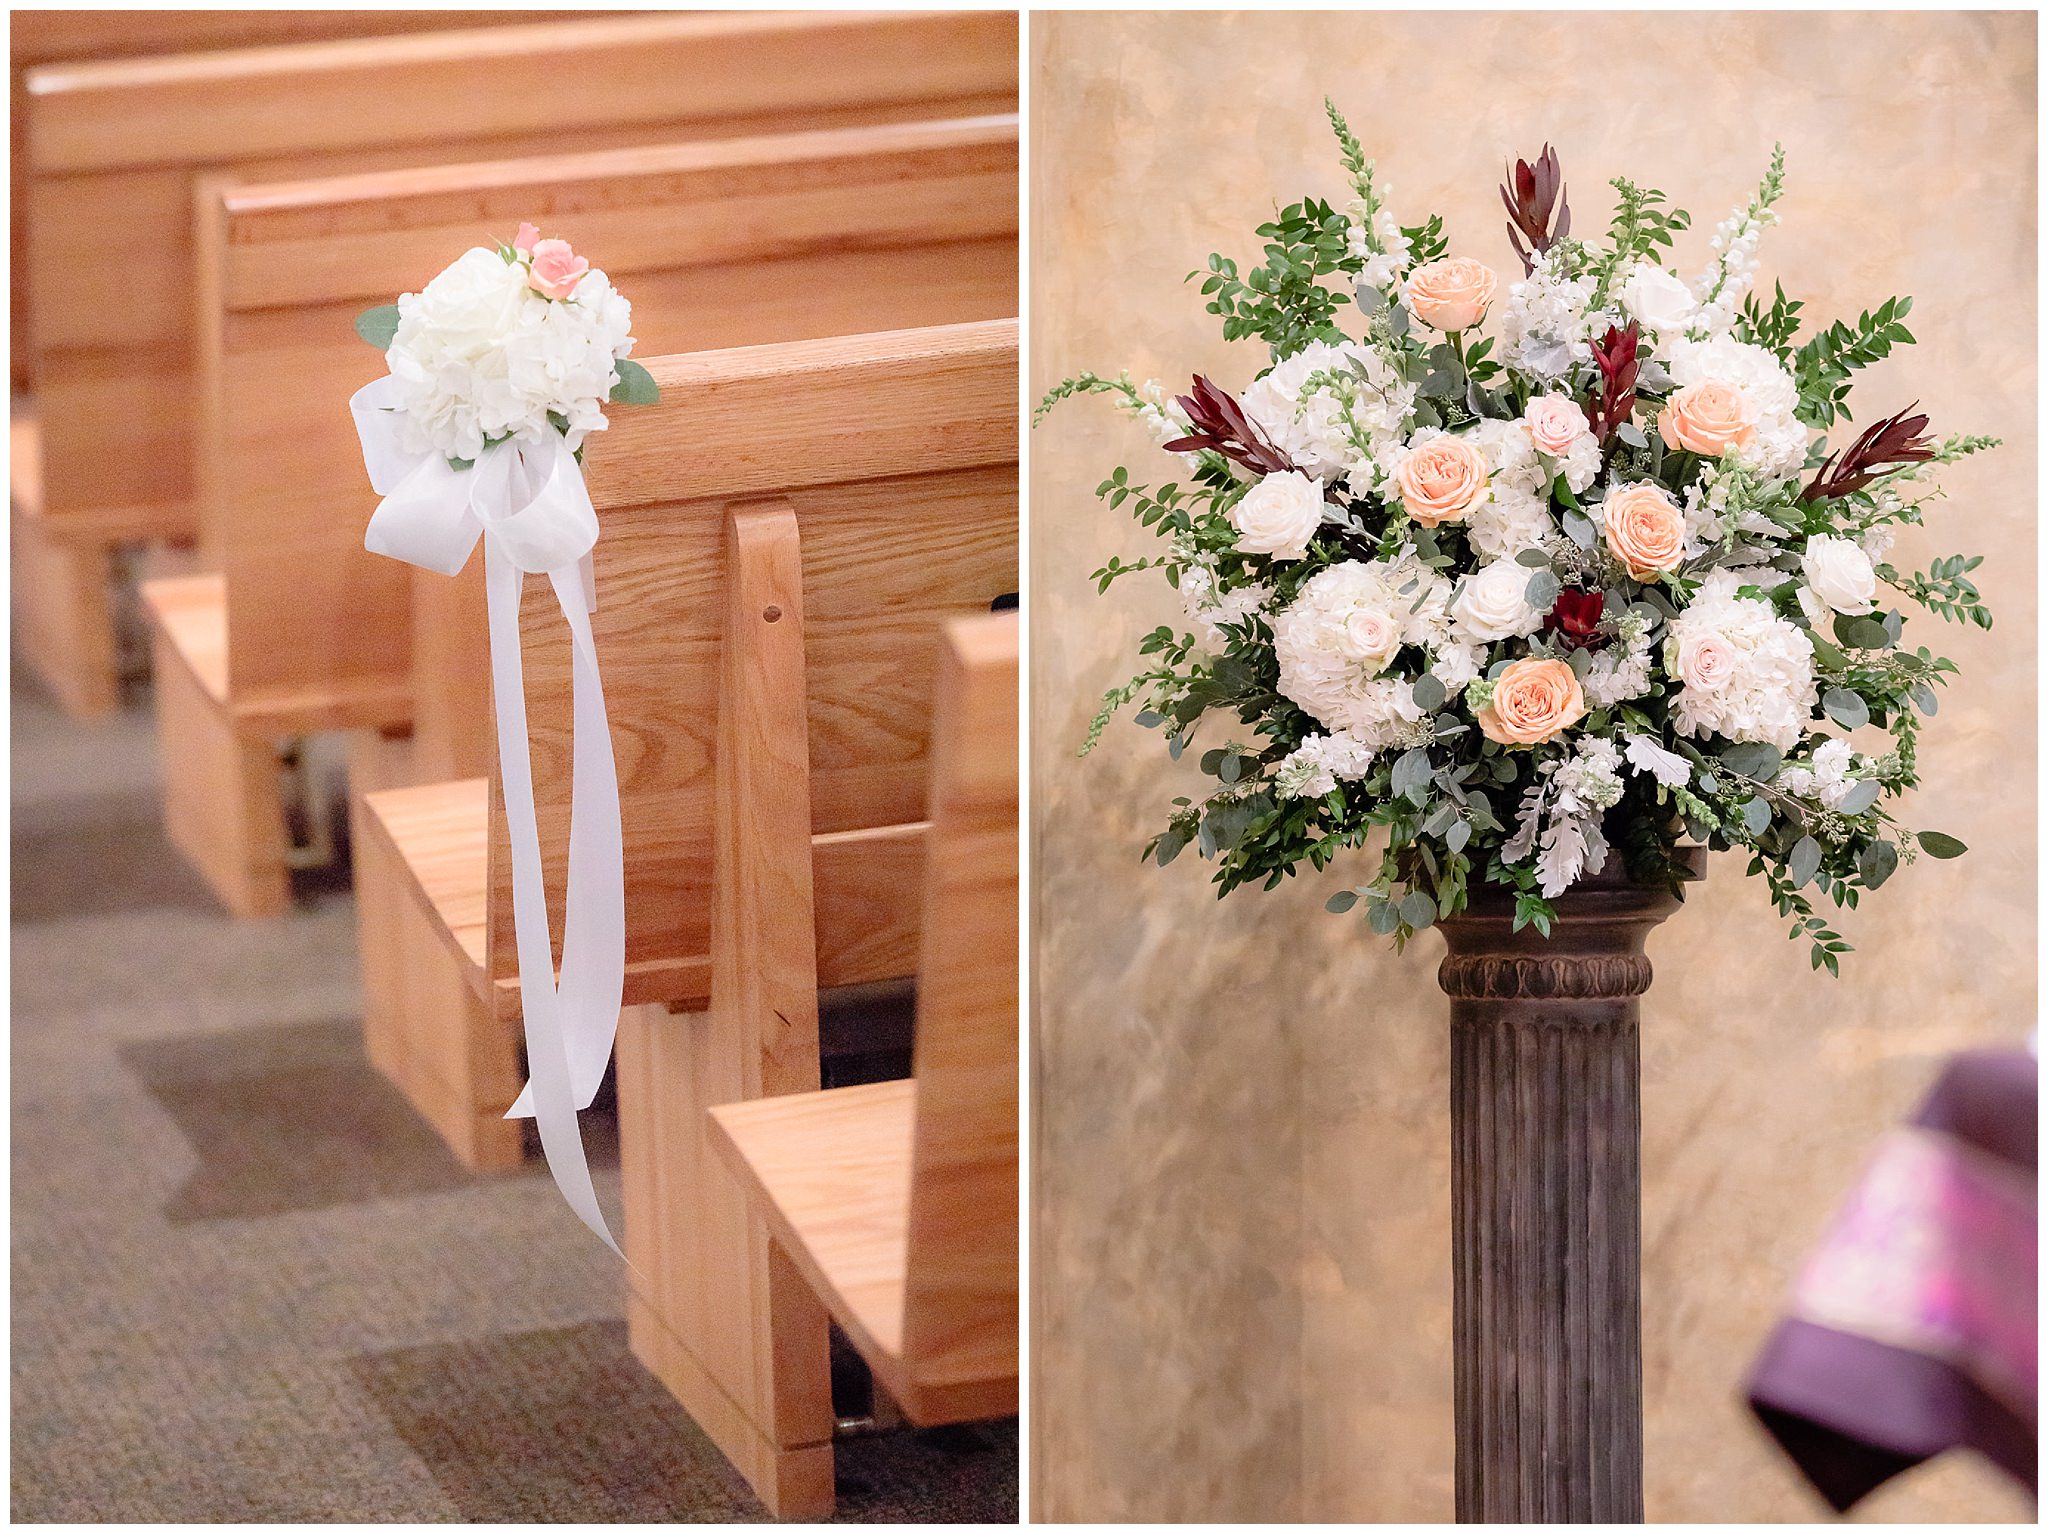 Ceremony flowers by Hepatica at a Mother of Sorrows wedding in Murrysville PA